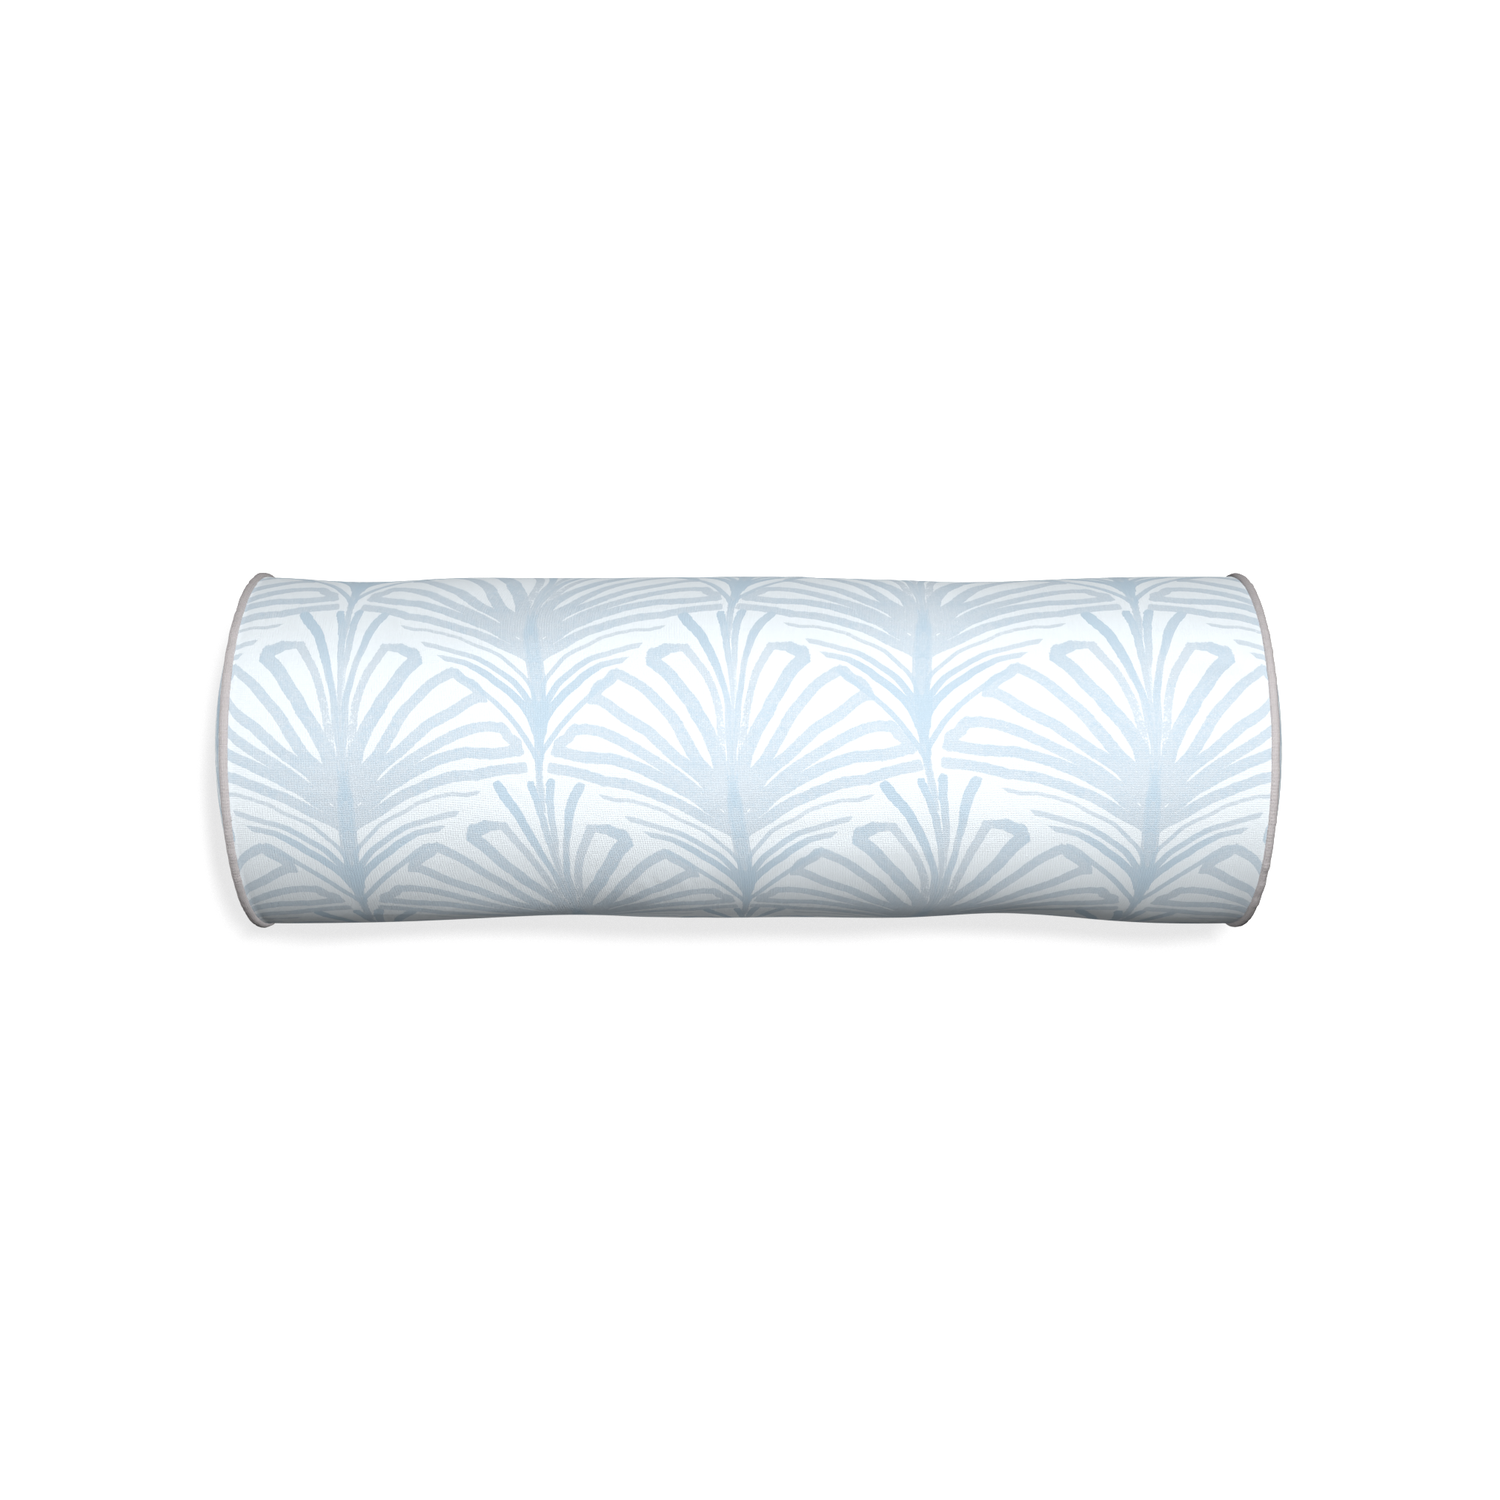 Bolster suzy sky custom sky blue palmpillow with pebble piping on white background